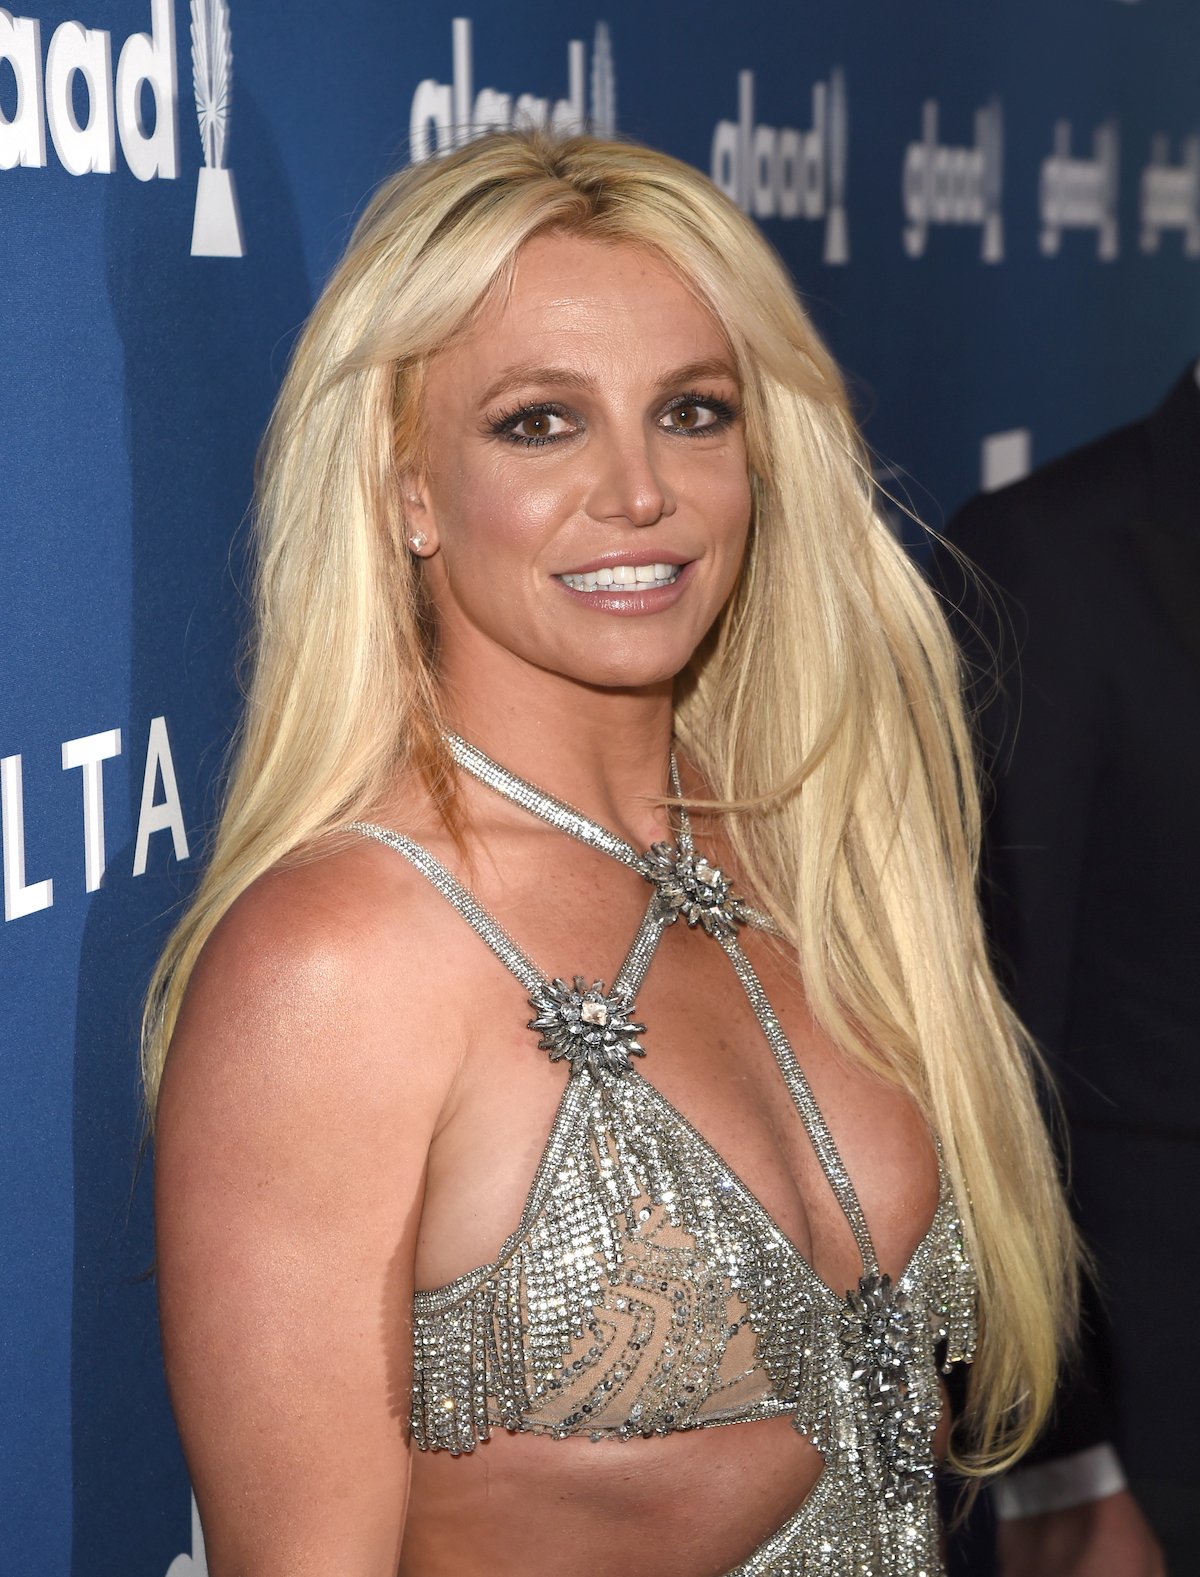 Britney Spears smiles in a sparkly silver outfit at an event.